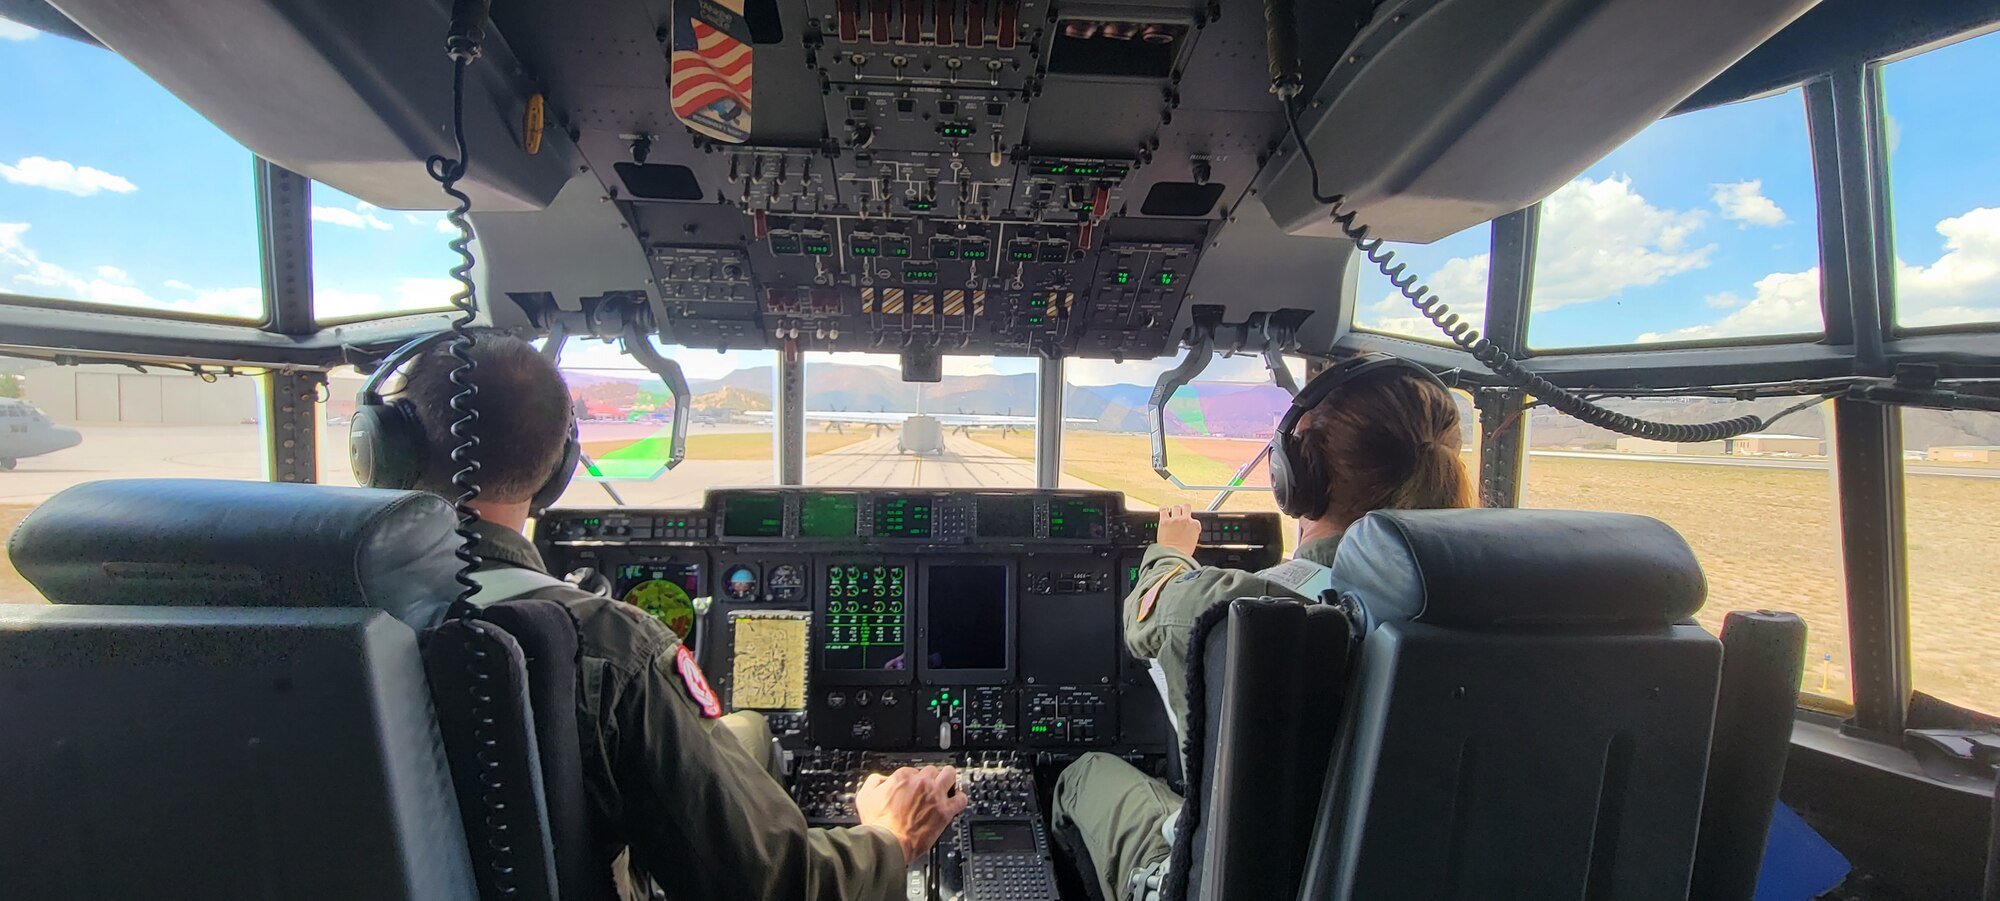 Maj. Nick Foreman and Lt. Col. Stephanie Brown, 815th Airlift Squadron pilots, prepare for take-off in the C-130J Super Hercules before the airdrop in Taylor Park, Colorado, while they take part in the 22nd Air Force’s flagship exercise Rally in the Rockies Sept. 13-17, 2021. The exercise is designed to develop Airmen for combat operations by challenging them with realistic scenarios that support a full spectrum of operations during military actions, operations or hostile environments. (U.S. Air Force photo by Capt. Will Garey)